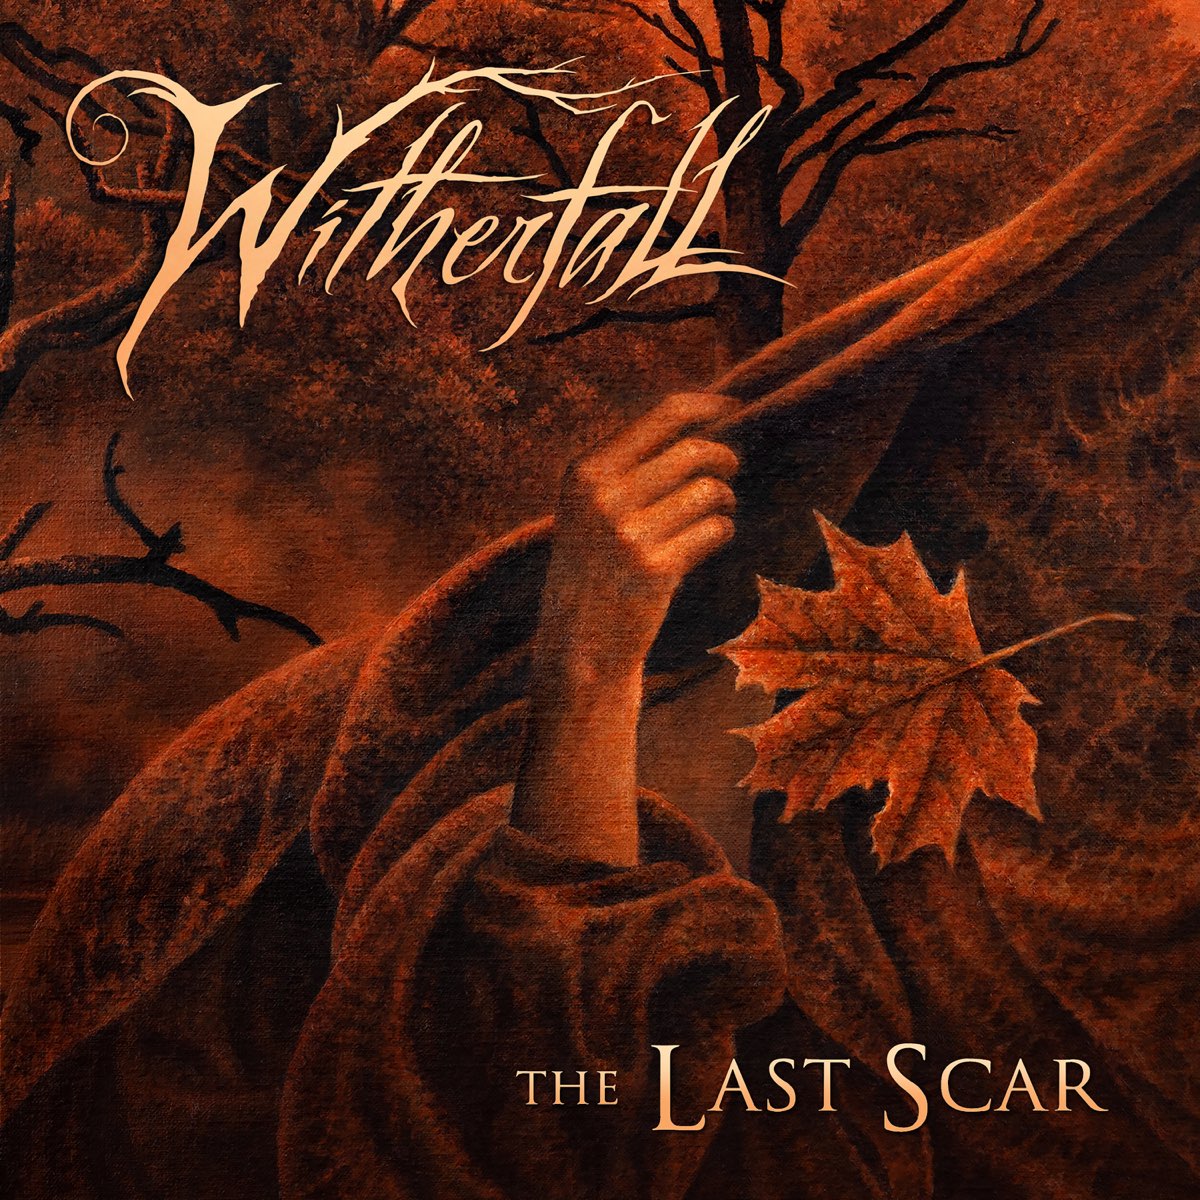 Scary last. Witherfall 2021 - Curse of autumn. Witherfall Nocturnes and Requiems. Witherfall - Vintage Ep CD. Scars above обложка.